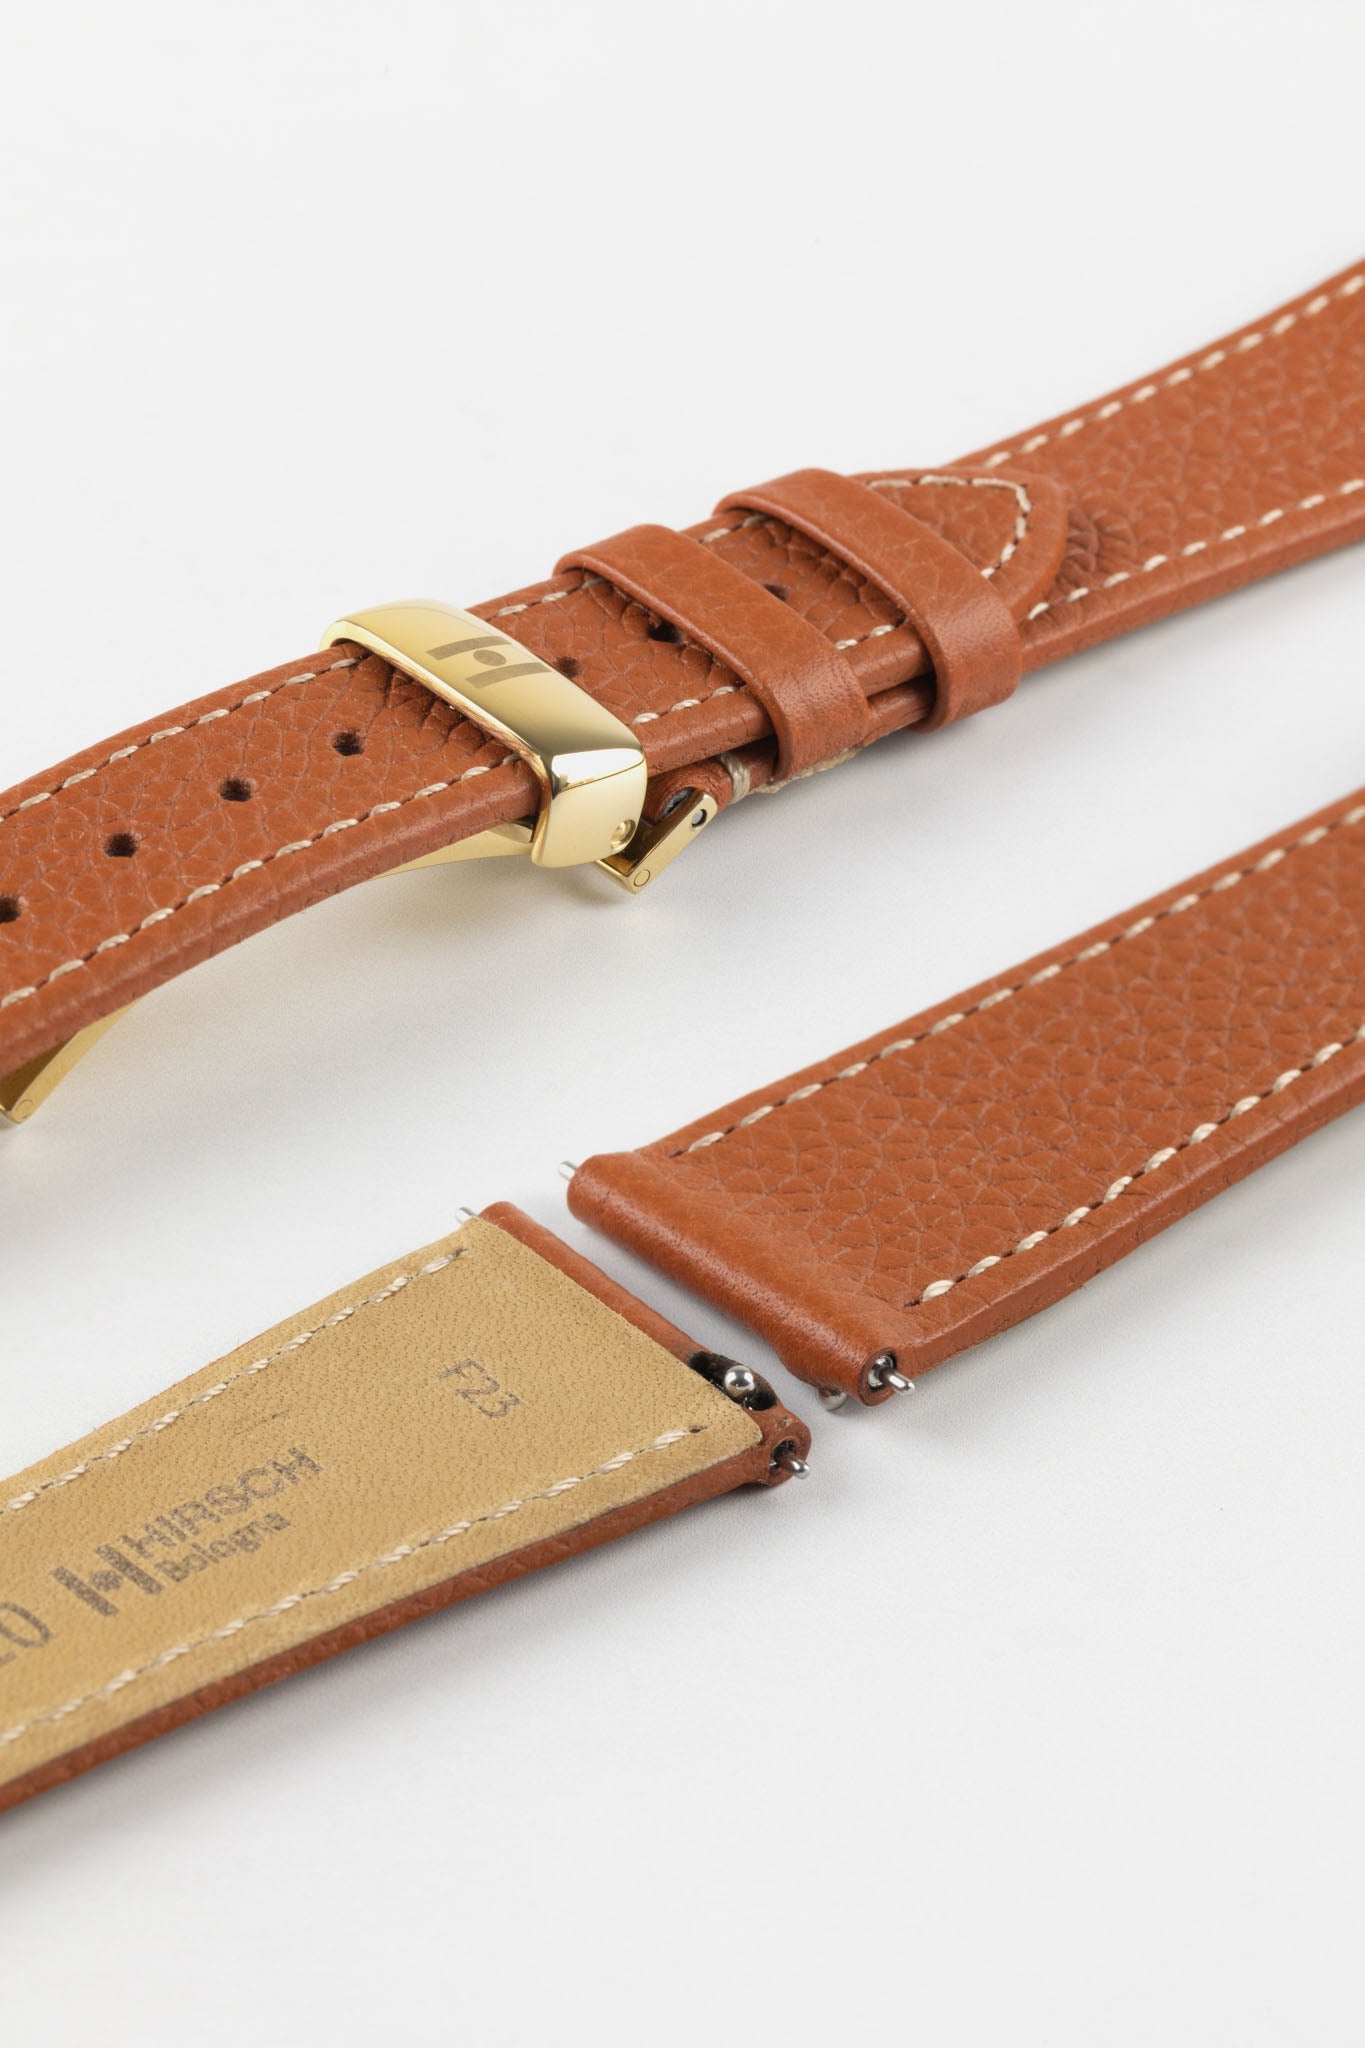 Quick release of gold brown hirsch bologna watch strap and polished gold sport deployment clasp